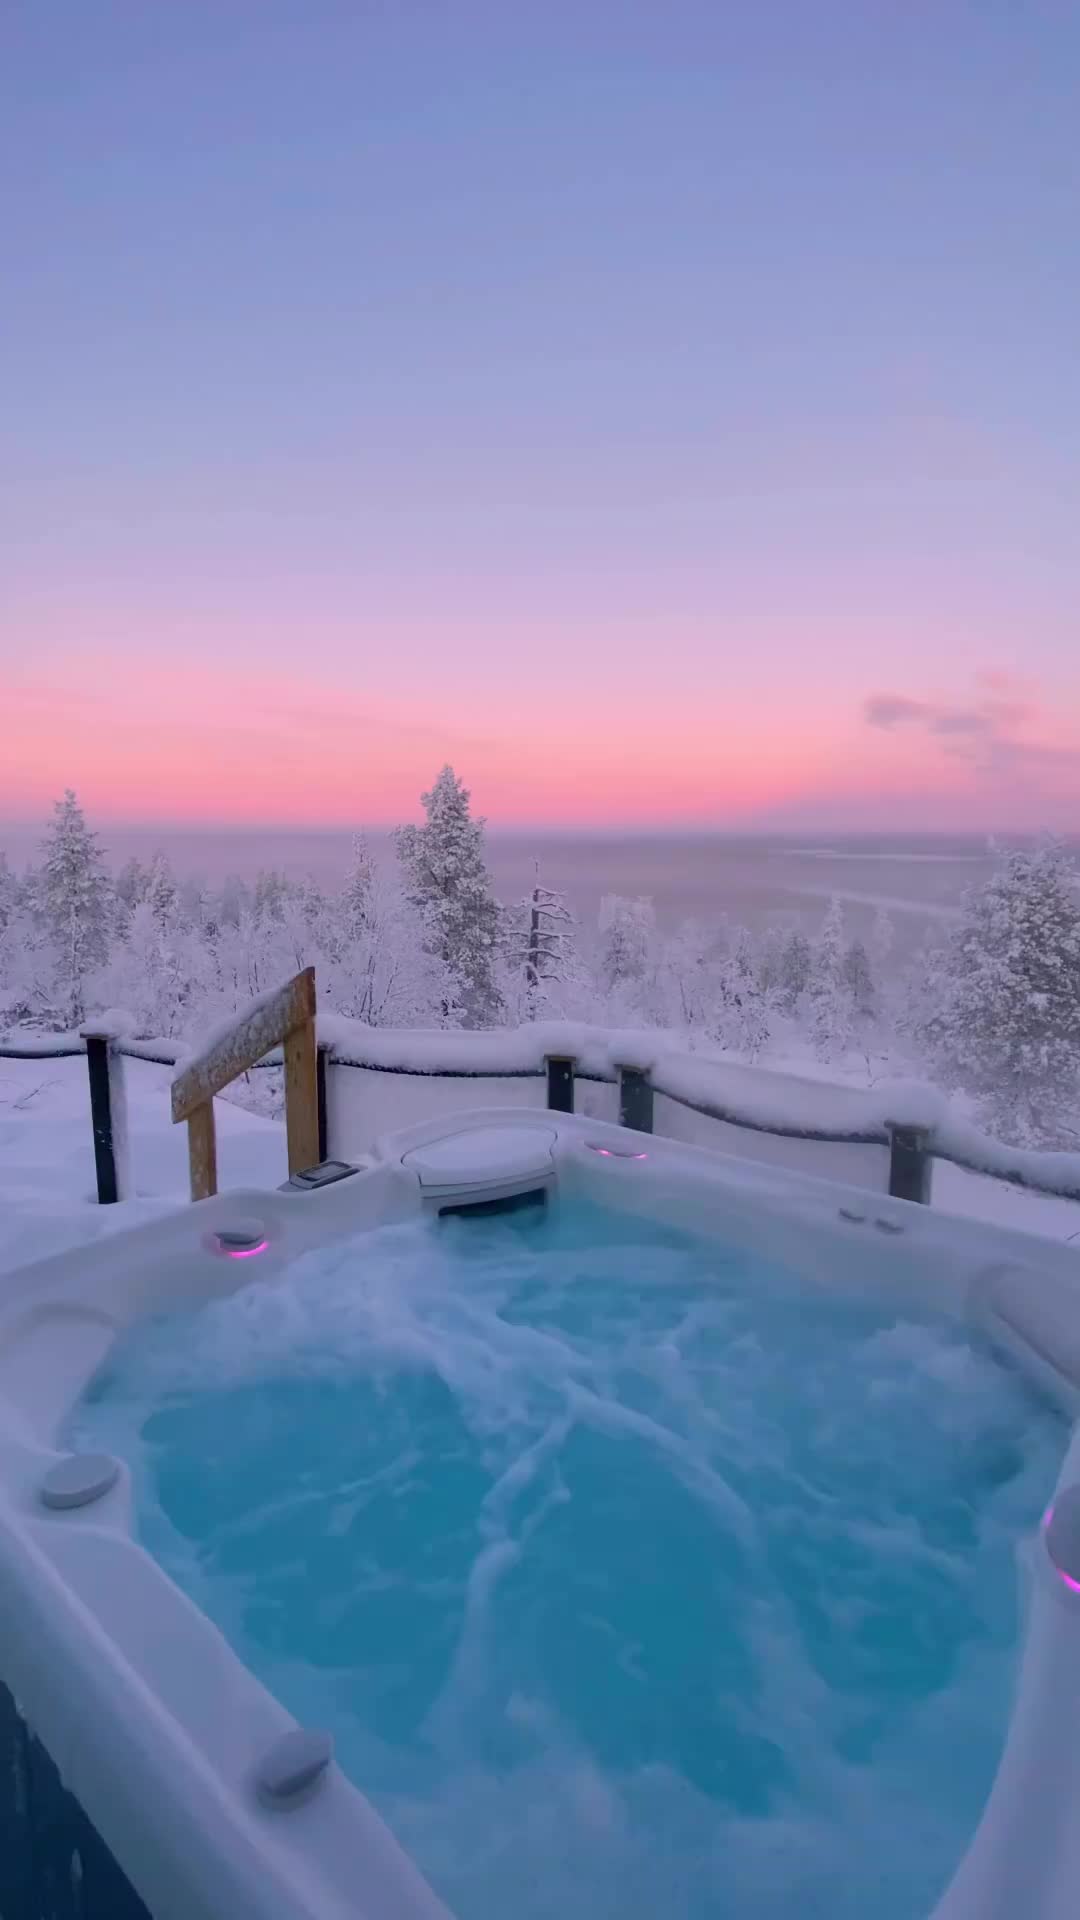 • Tag someone you'd like to go here with •
• Levin Inglut has to do with the Northern Lights! You will stay in a glass igloo and sleep in the motorized bed, so you can adjust it for a perfect view •
·
·
·
·
·
·
#bestplacestogo #earthfocus
#earthofficial #bestvacations
#welivetoexplore #travel
#traveladdict #places_wow
#wonderful_places #hotels
#travellingthroughtheworld 
#beachesnresorts 
#explorer
#love #sunset #sunrise 
#bestvacations #finland 
 #living_hotels #glorioushotels #visitfinland
#discoverfinland #ig_hotels #resortsmagazine #tasteinhotels #leviniglut #goldencrown